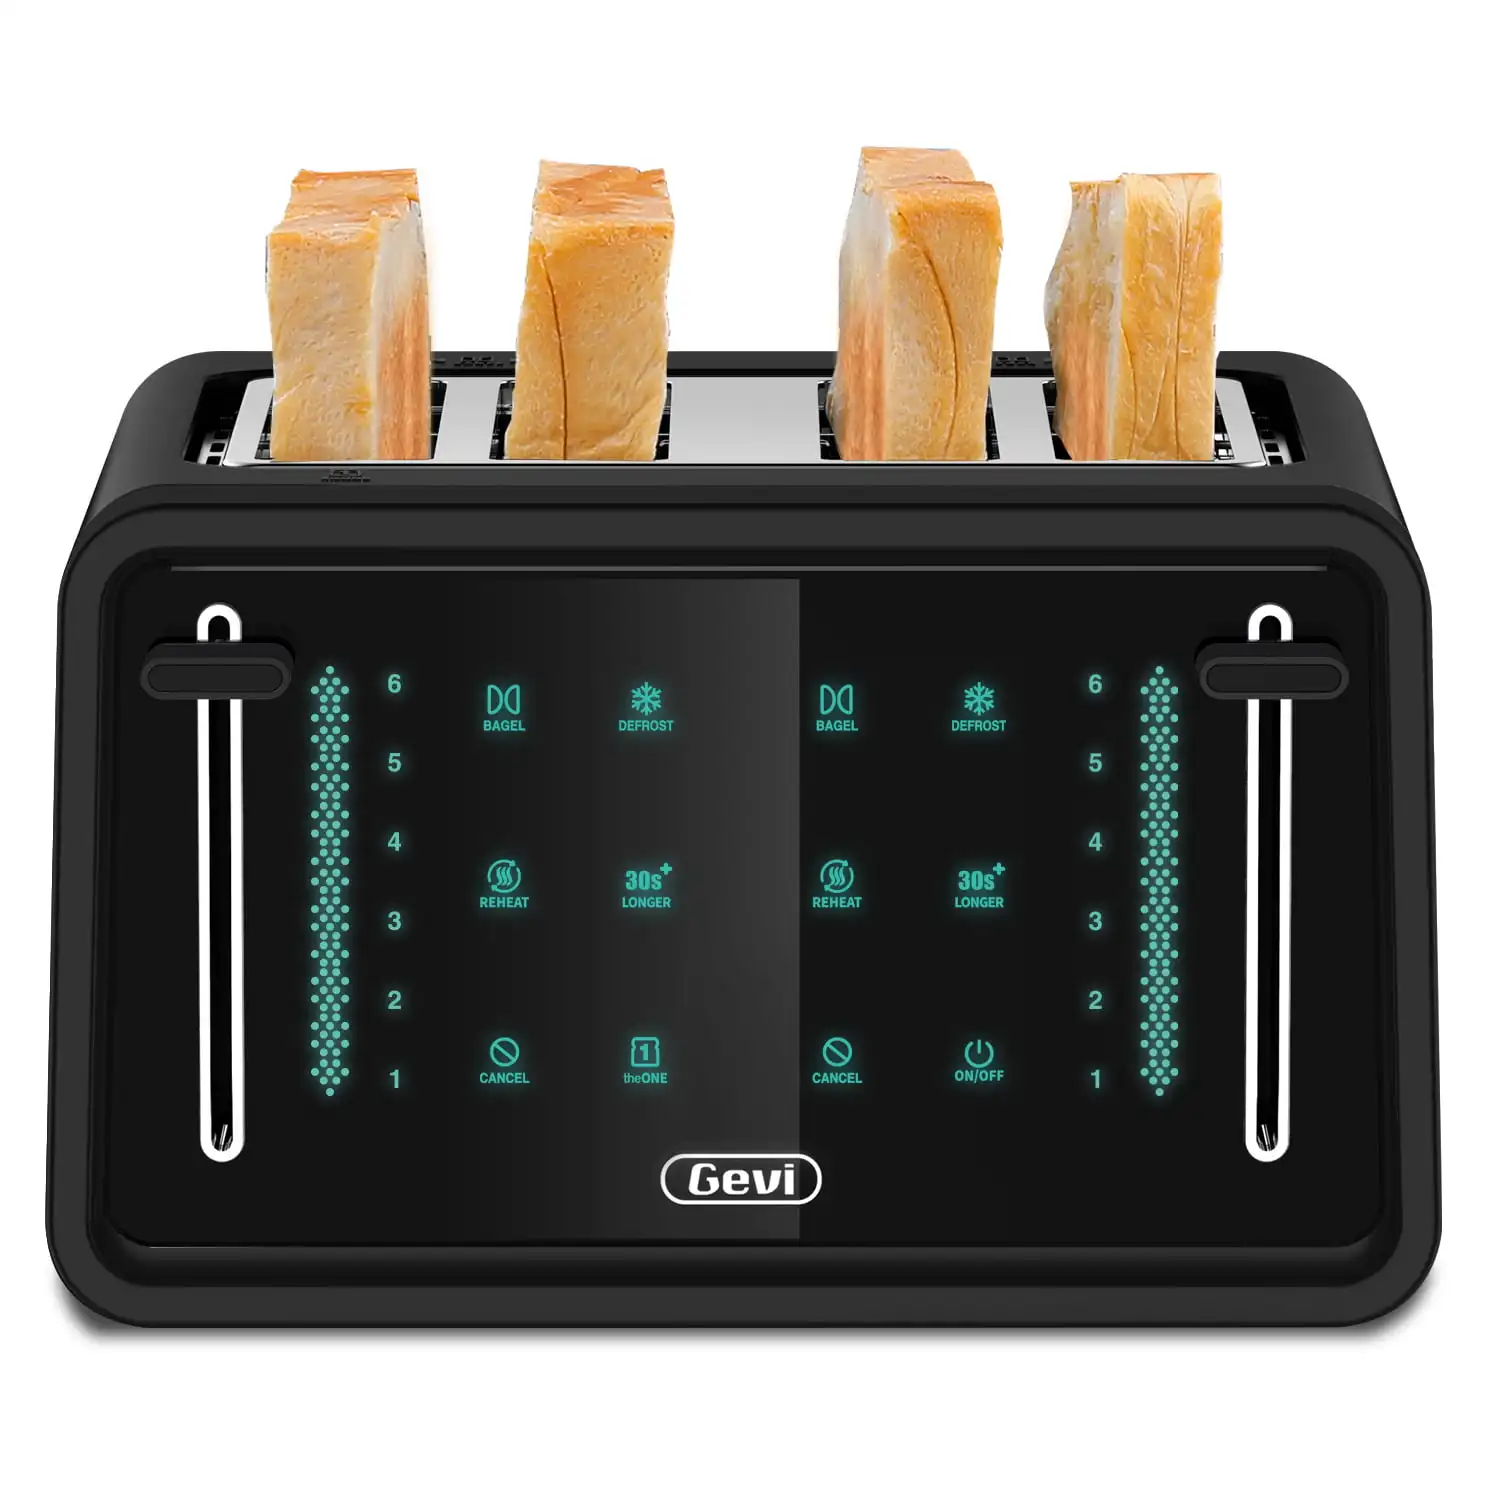 kitchen bread grill Black 4 Slice Toaster LED Digital Touchscreen Extra-Wide Slots Toasting Machine